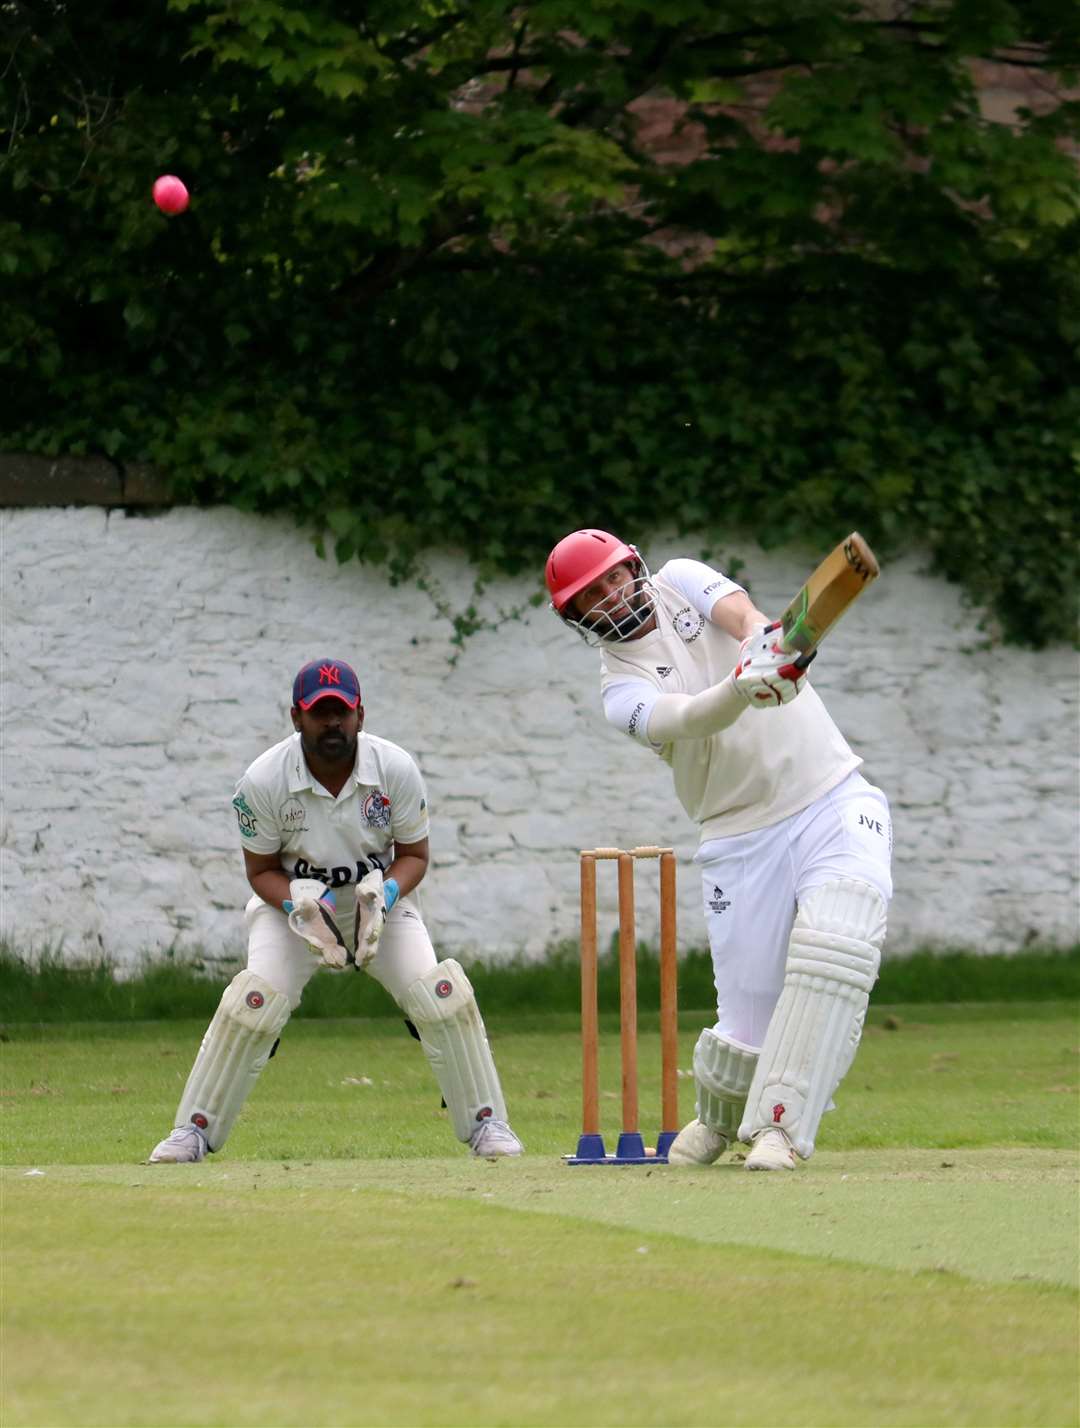 Northern Counties v Highland cricket friendly at the Northern Meeting Park..J. Vanee batting with Diwa ready to catch the ball..Picture: James Mackenzie..